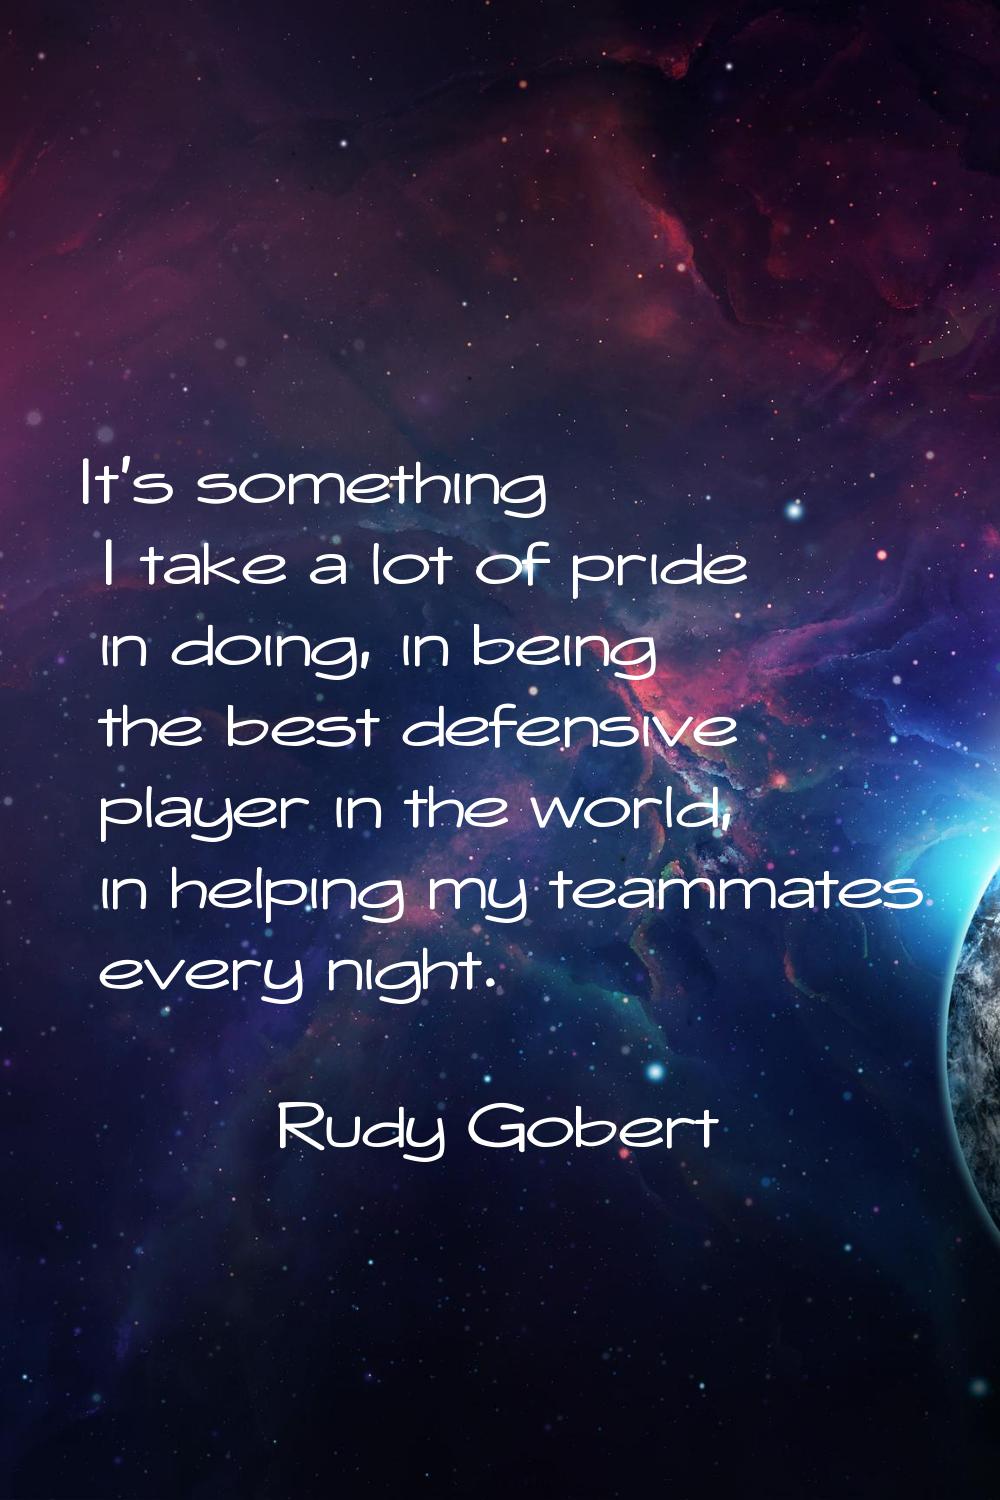 It's something I take a lot of pride in doing, in being the best defensive player in the world, in 